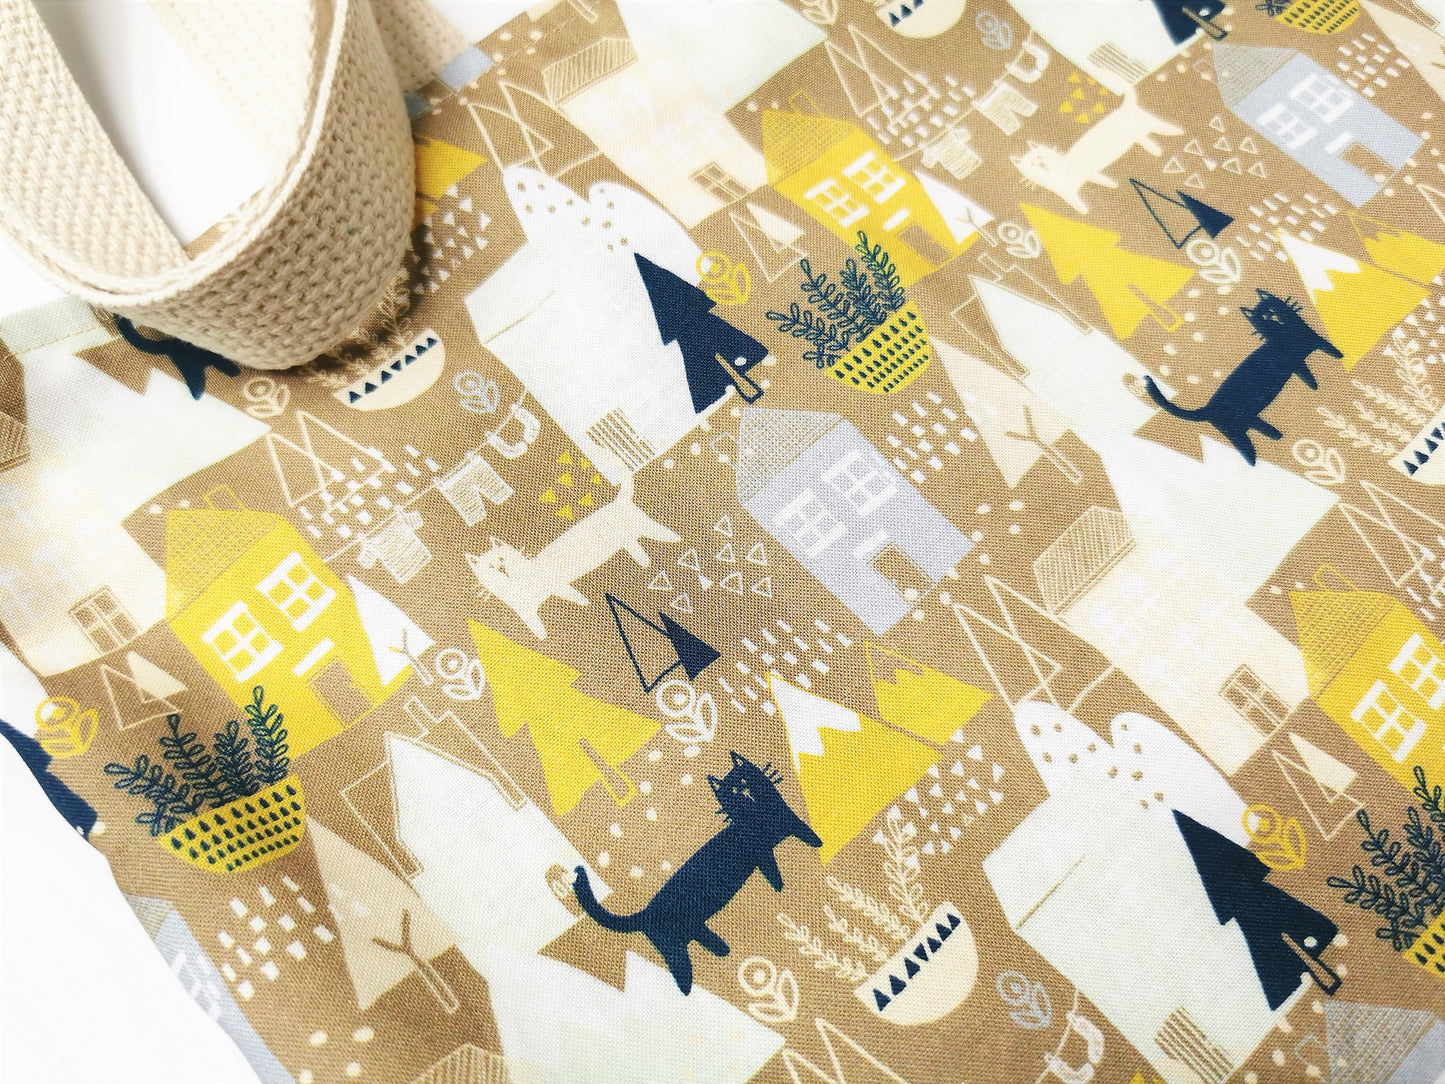 cotton fabric detail with village houses, trees and cats